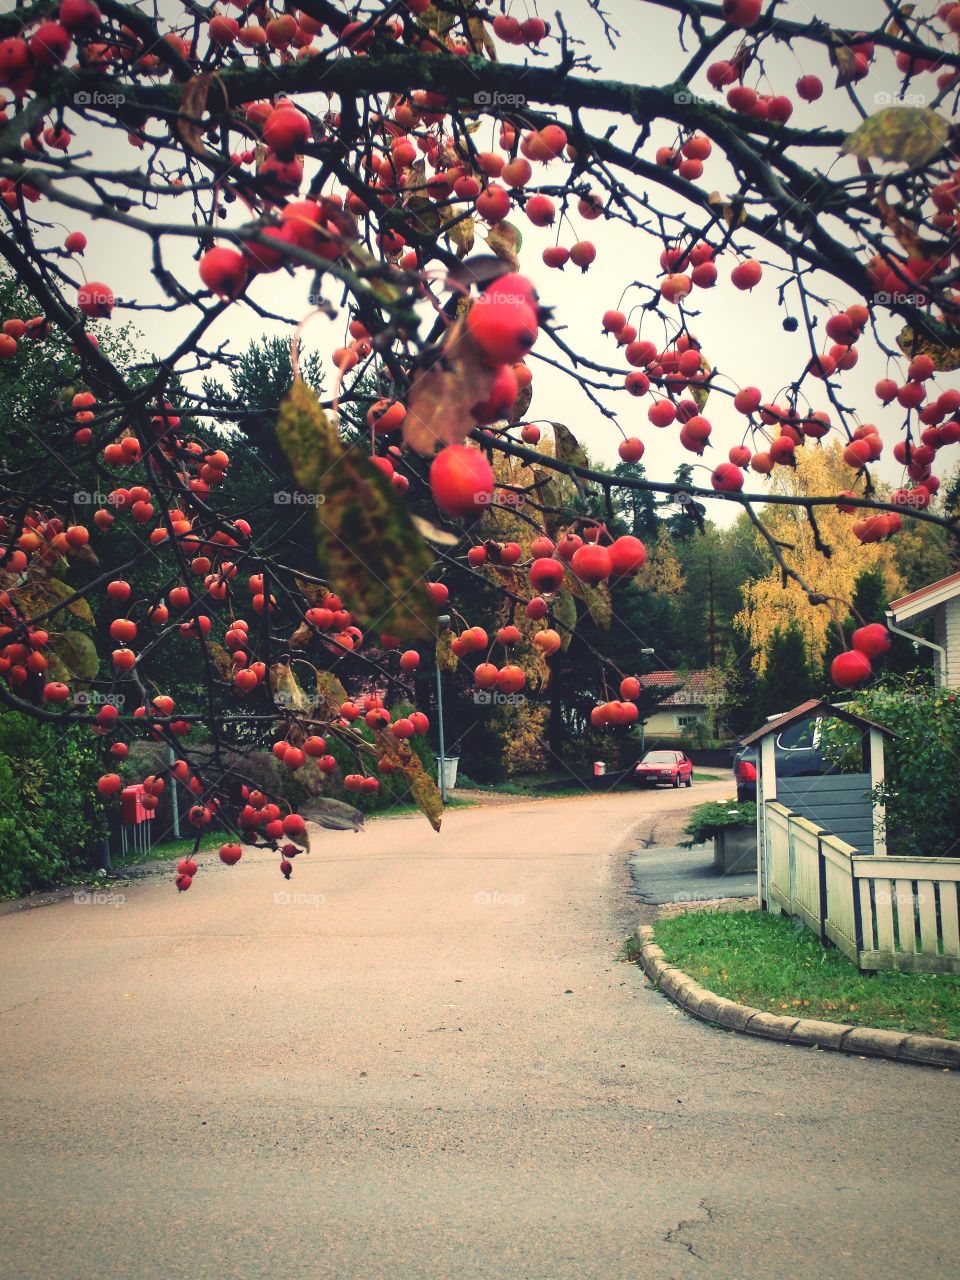 Apples and street